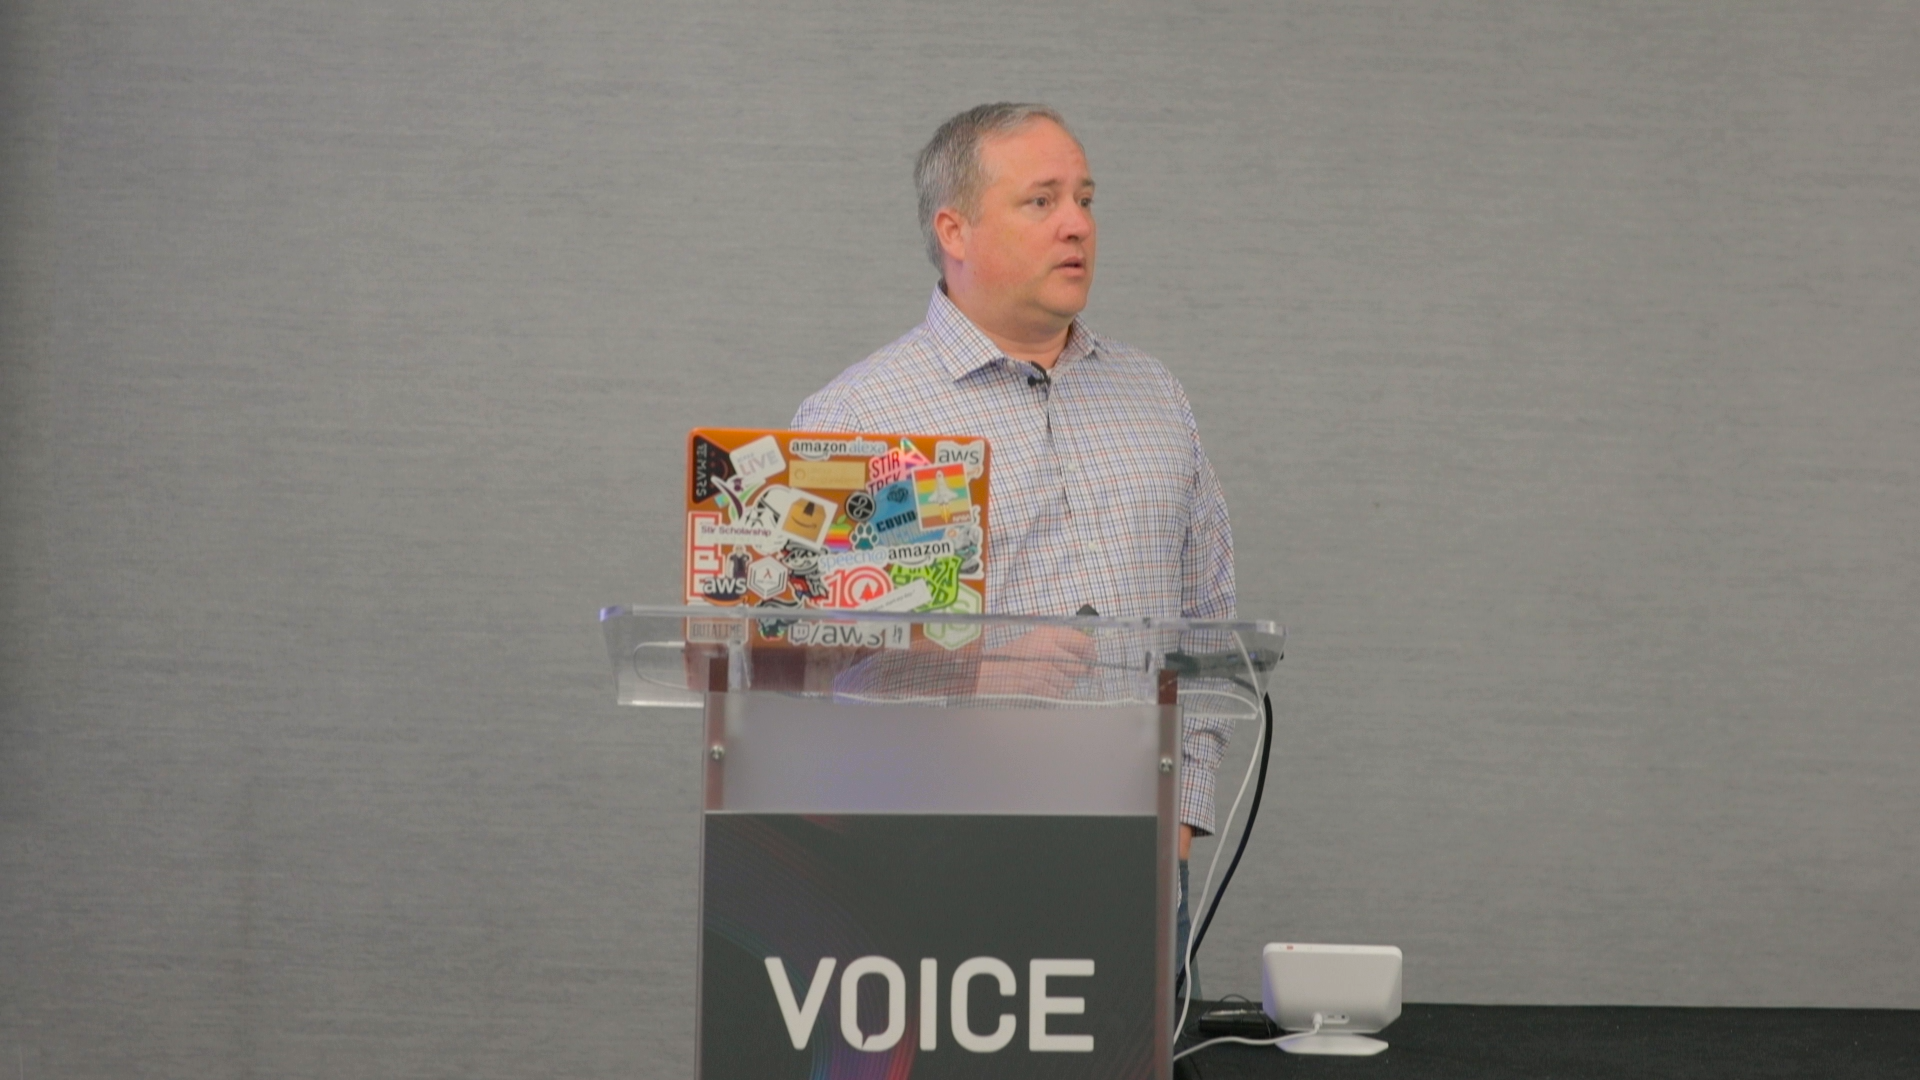 VOICE22 | Ten Things Every Voice App Should Do | Jeff Blankenburg